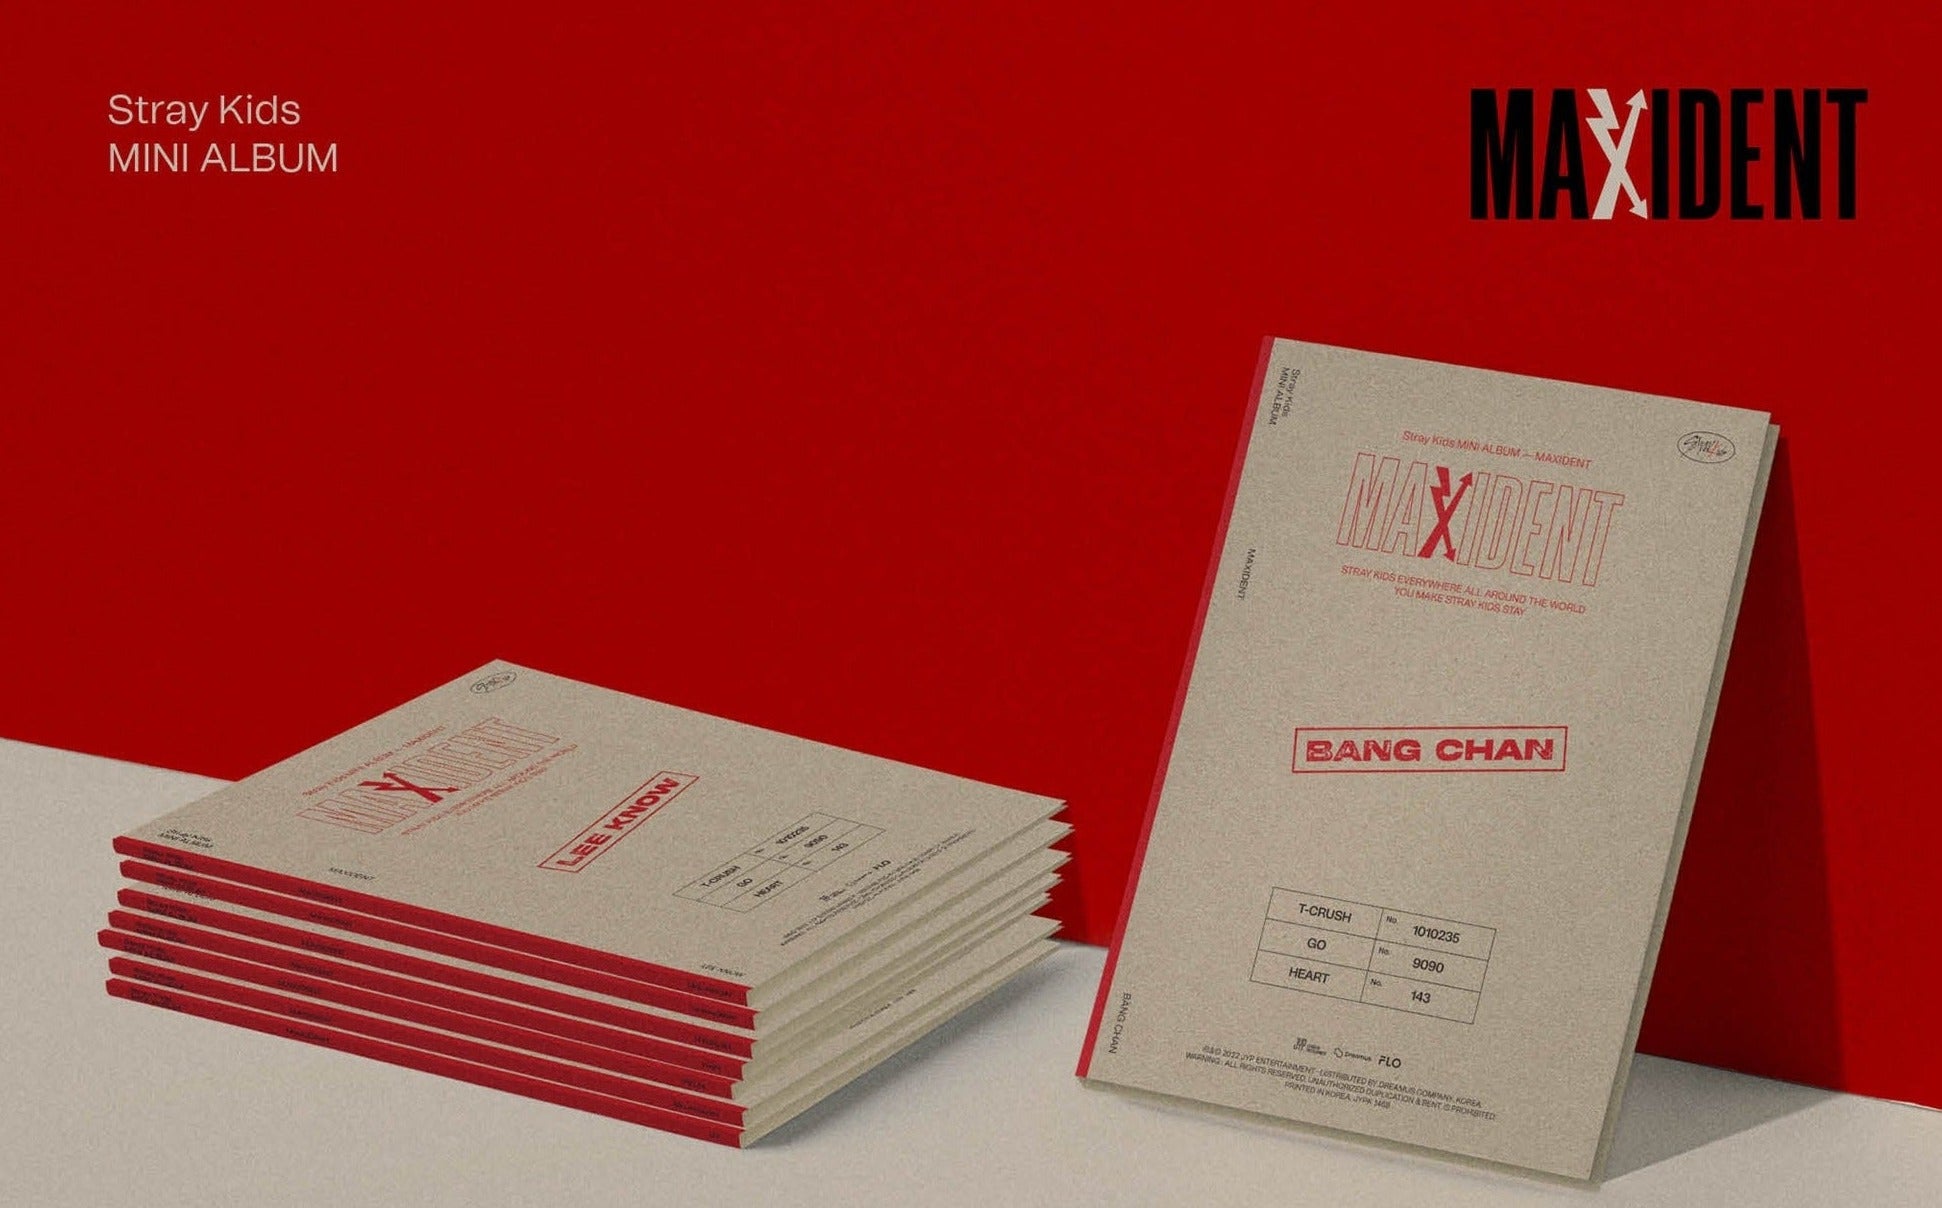 Stray Kids' 'Maxident': Release date, versions and how to pre